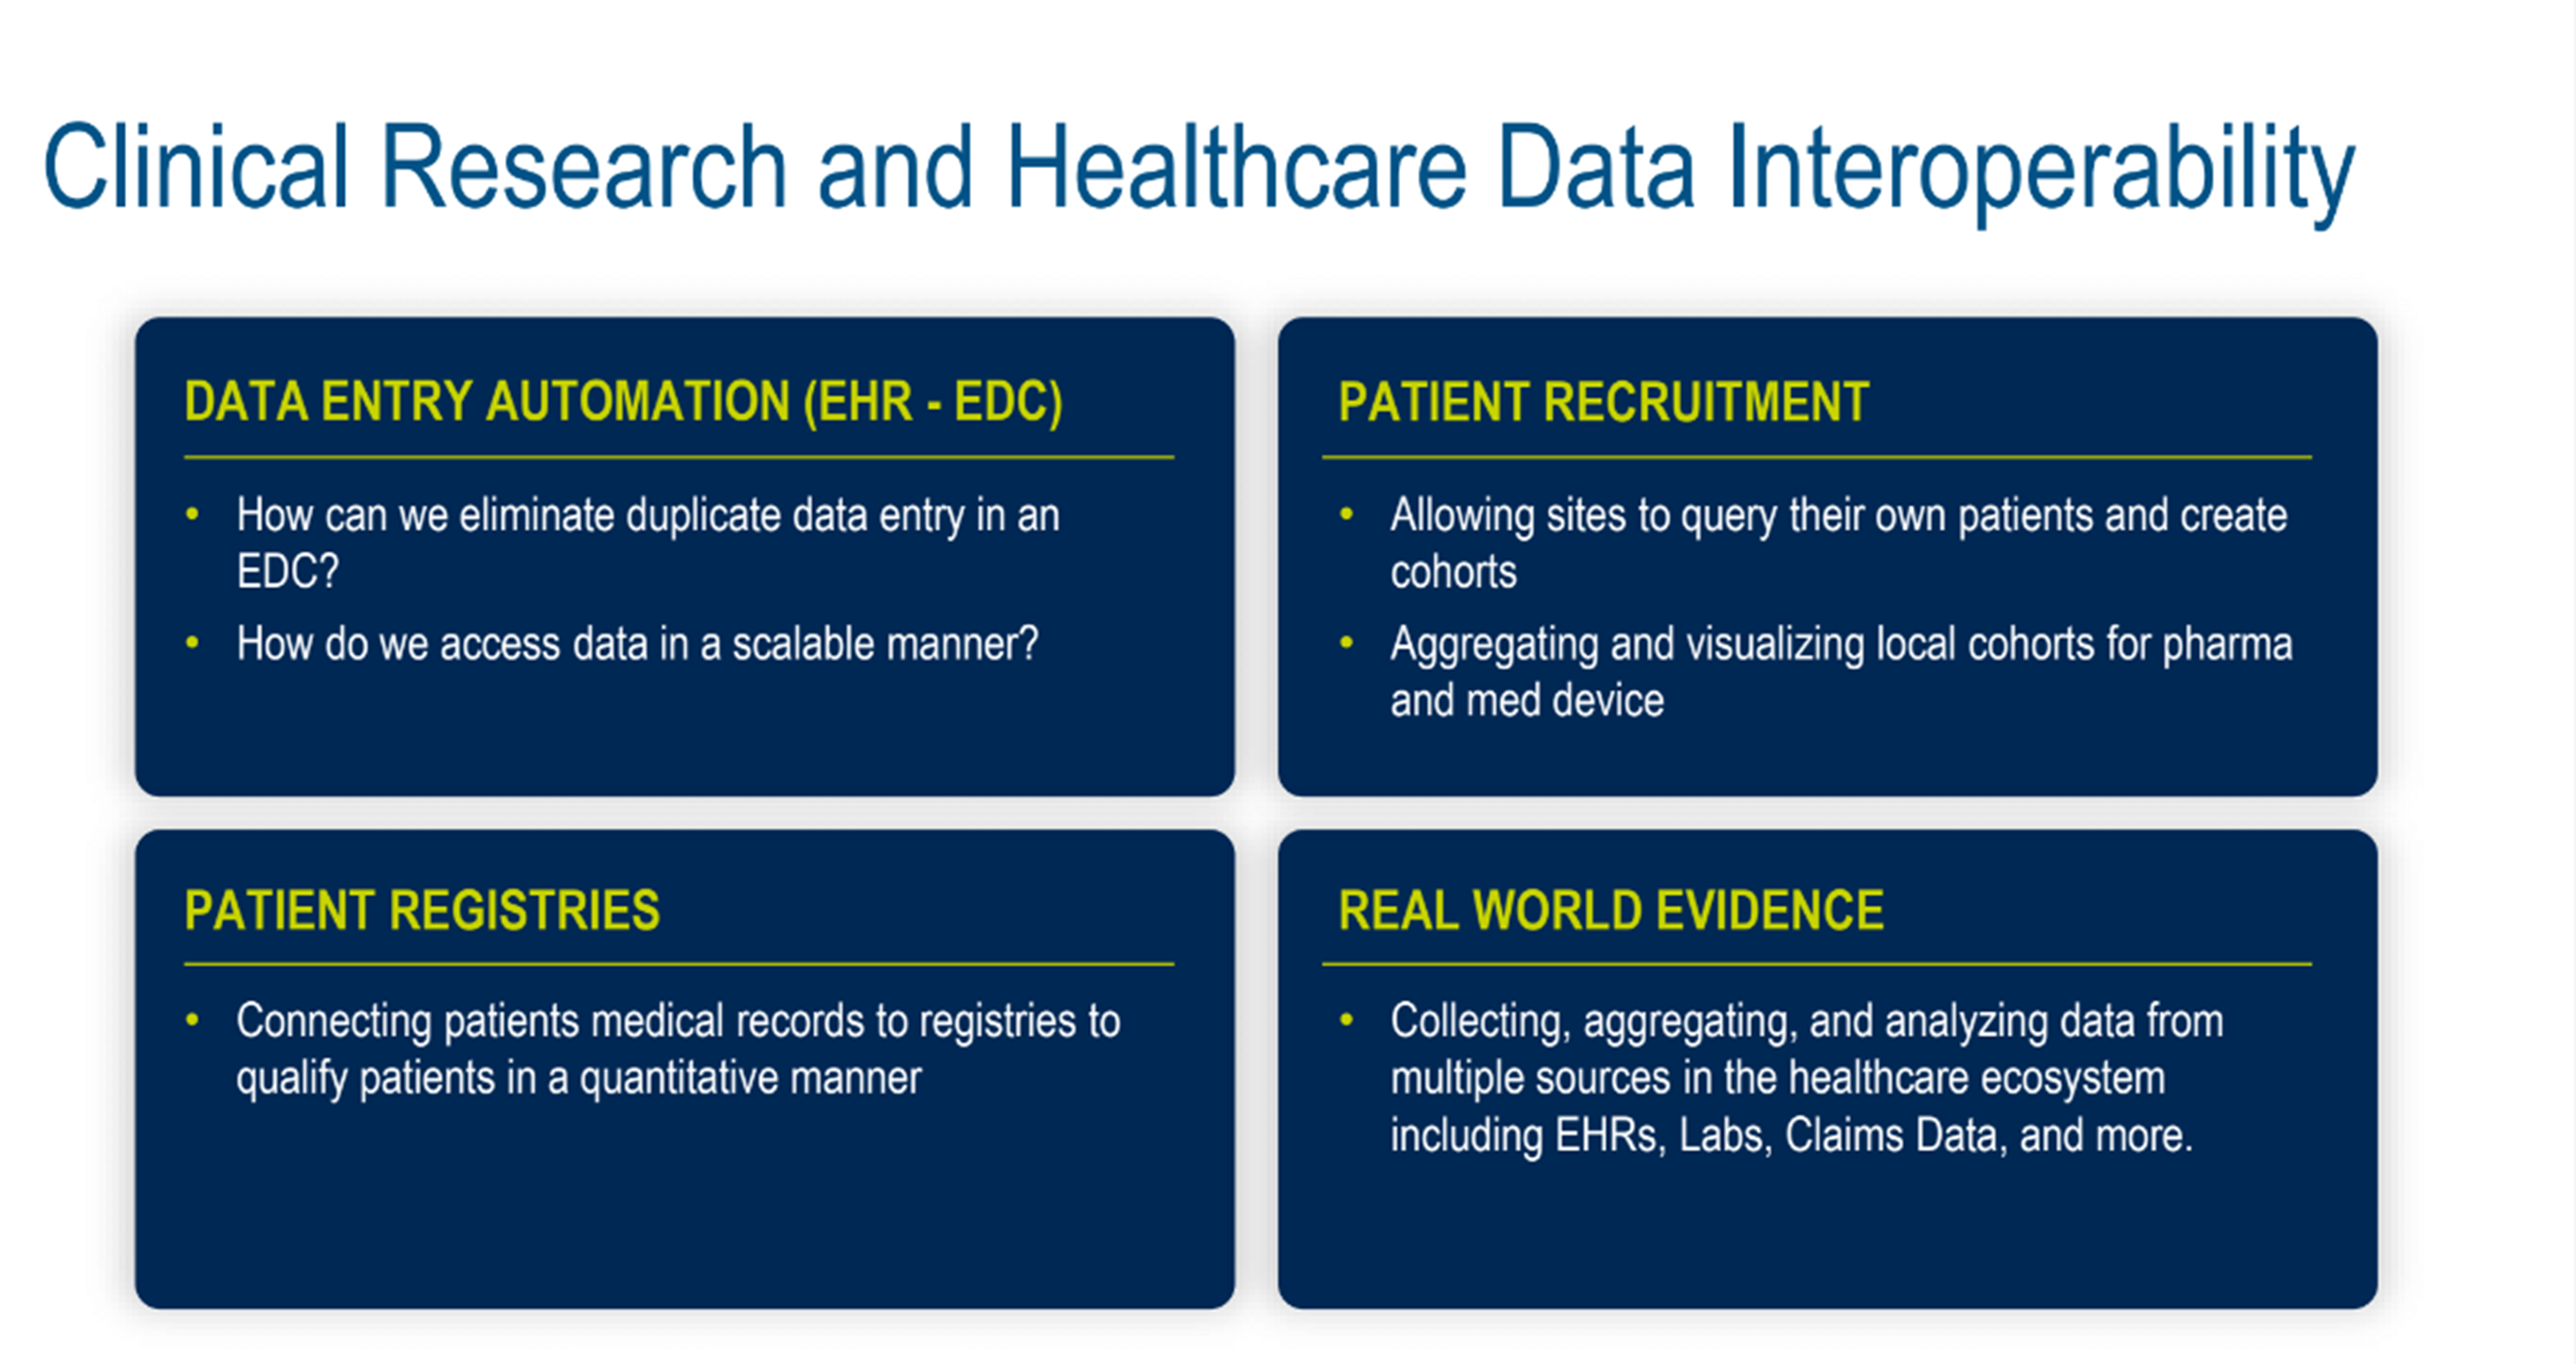 Clinical research and healthcare data interoperability.